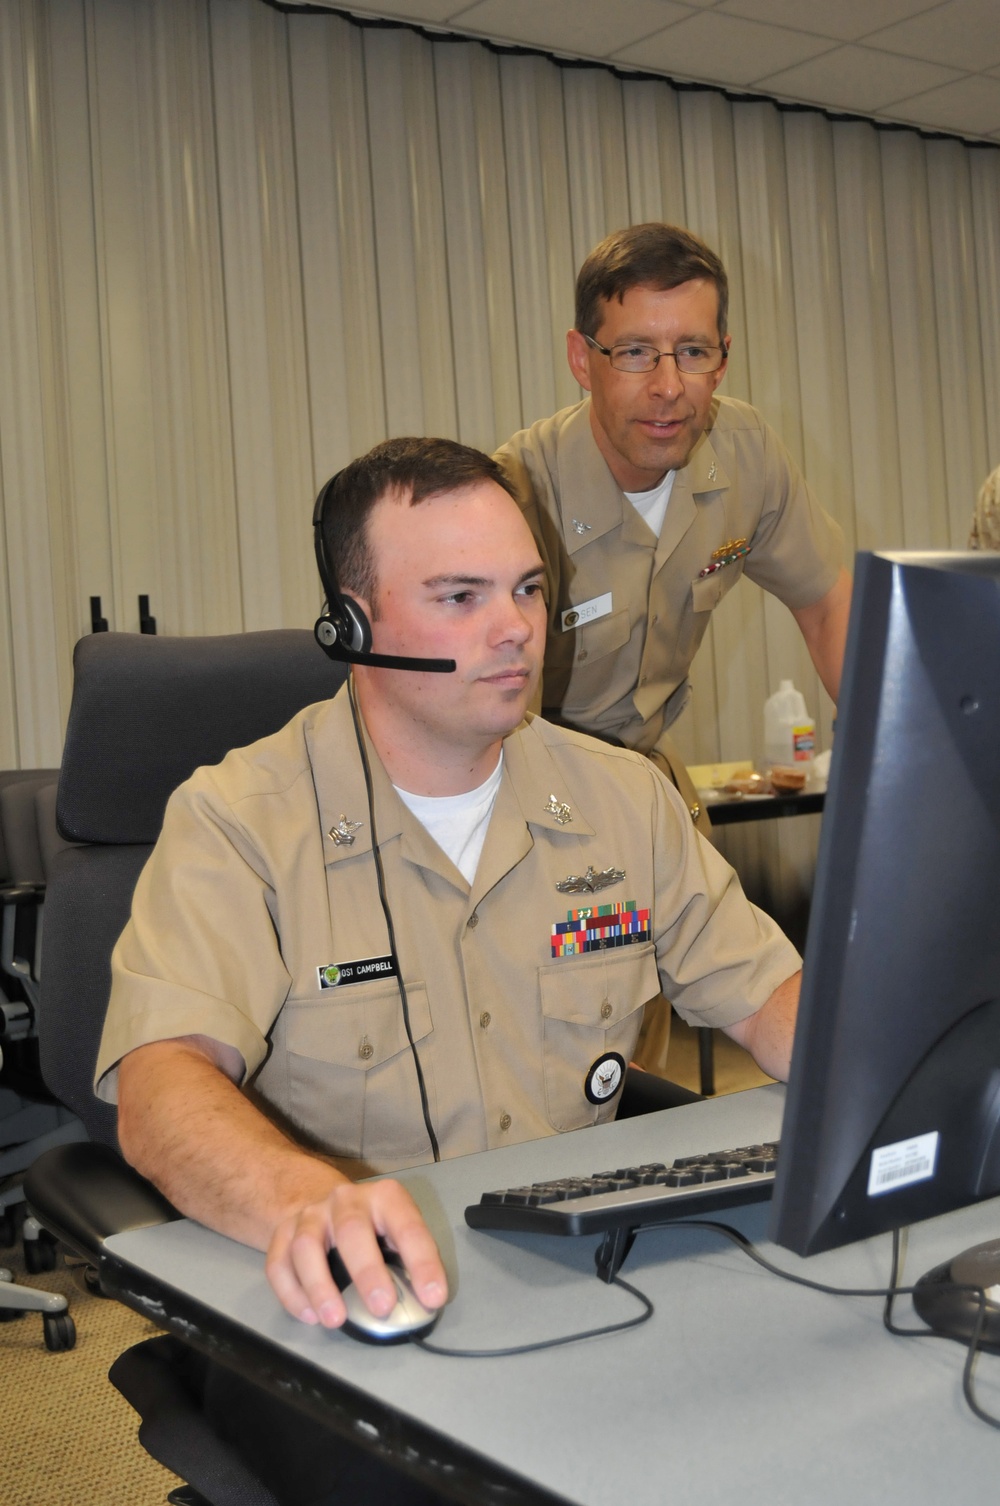 SPAWAR tests emerging technologies to improve warfighter readiness